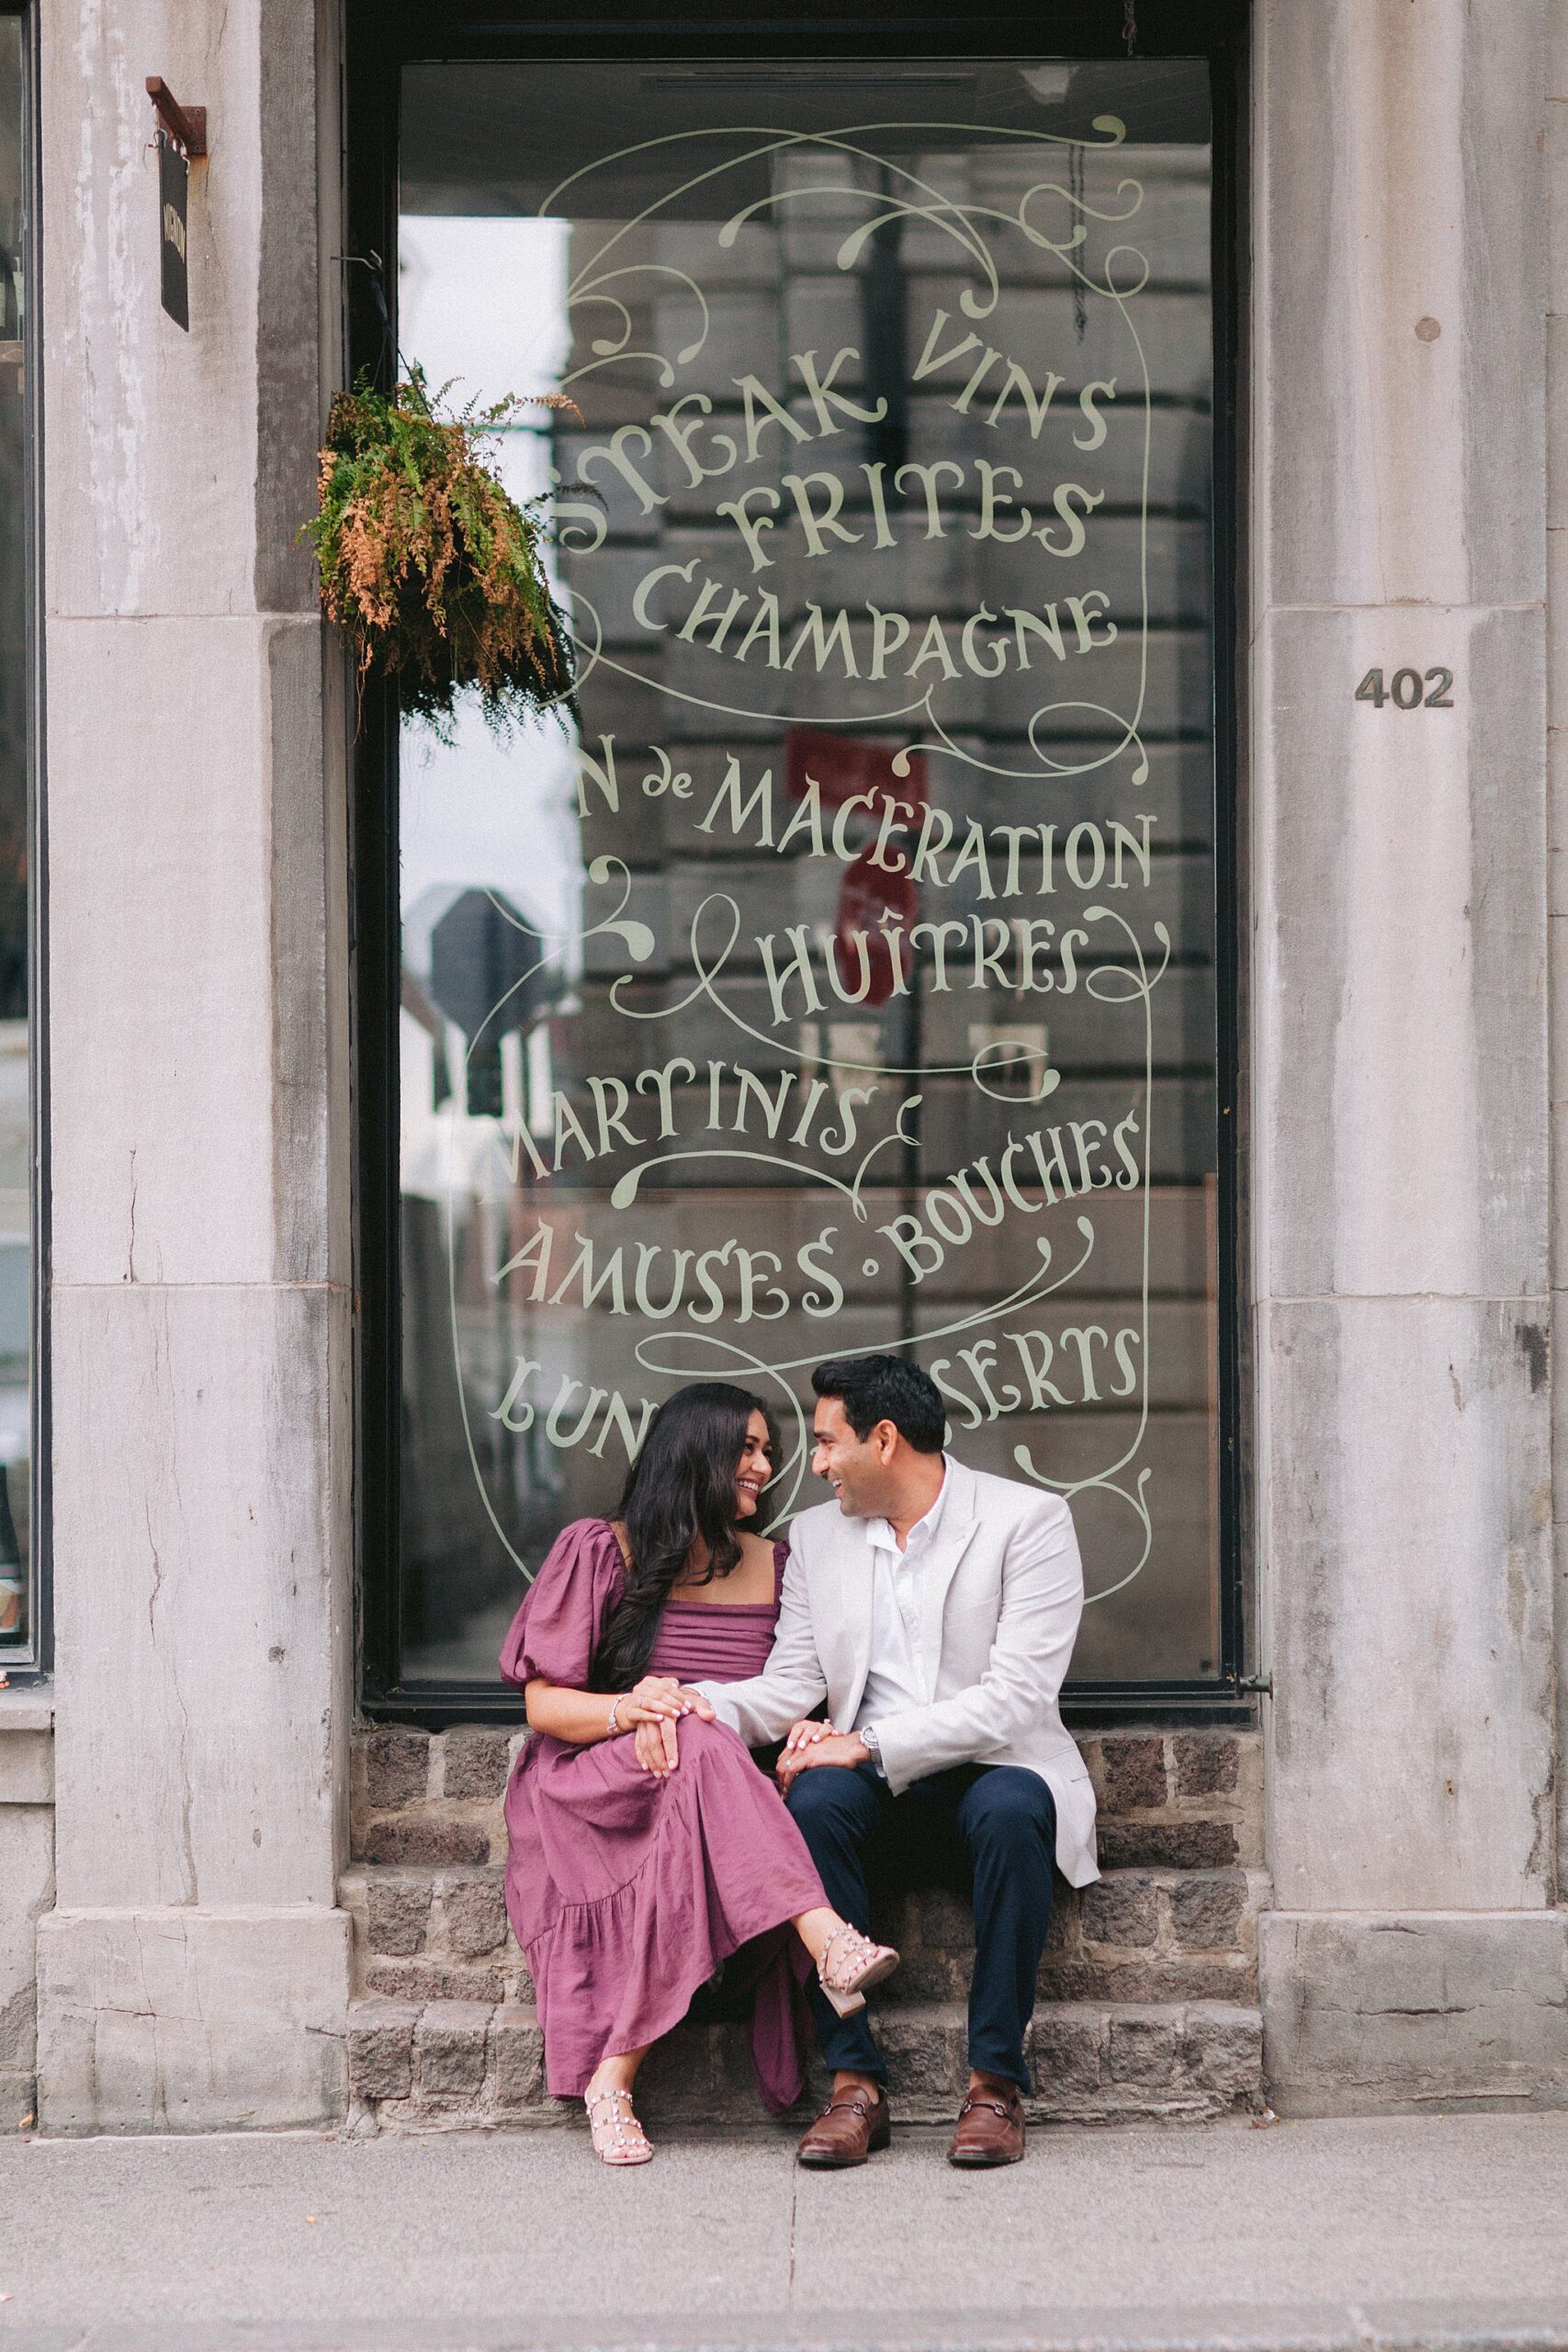 Montreal's charm complements their love story in this engagement shot